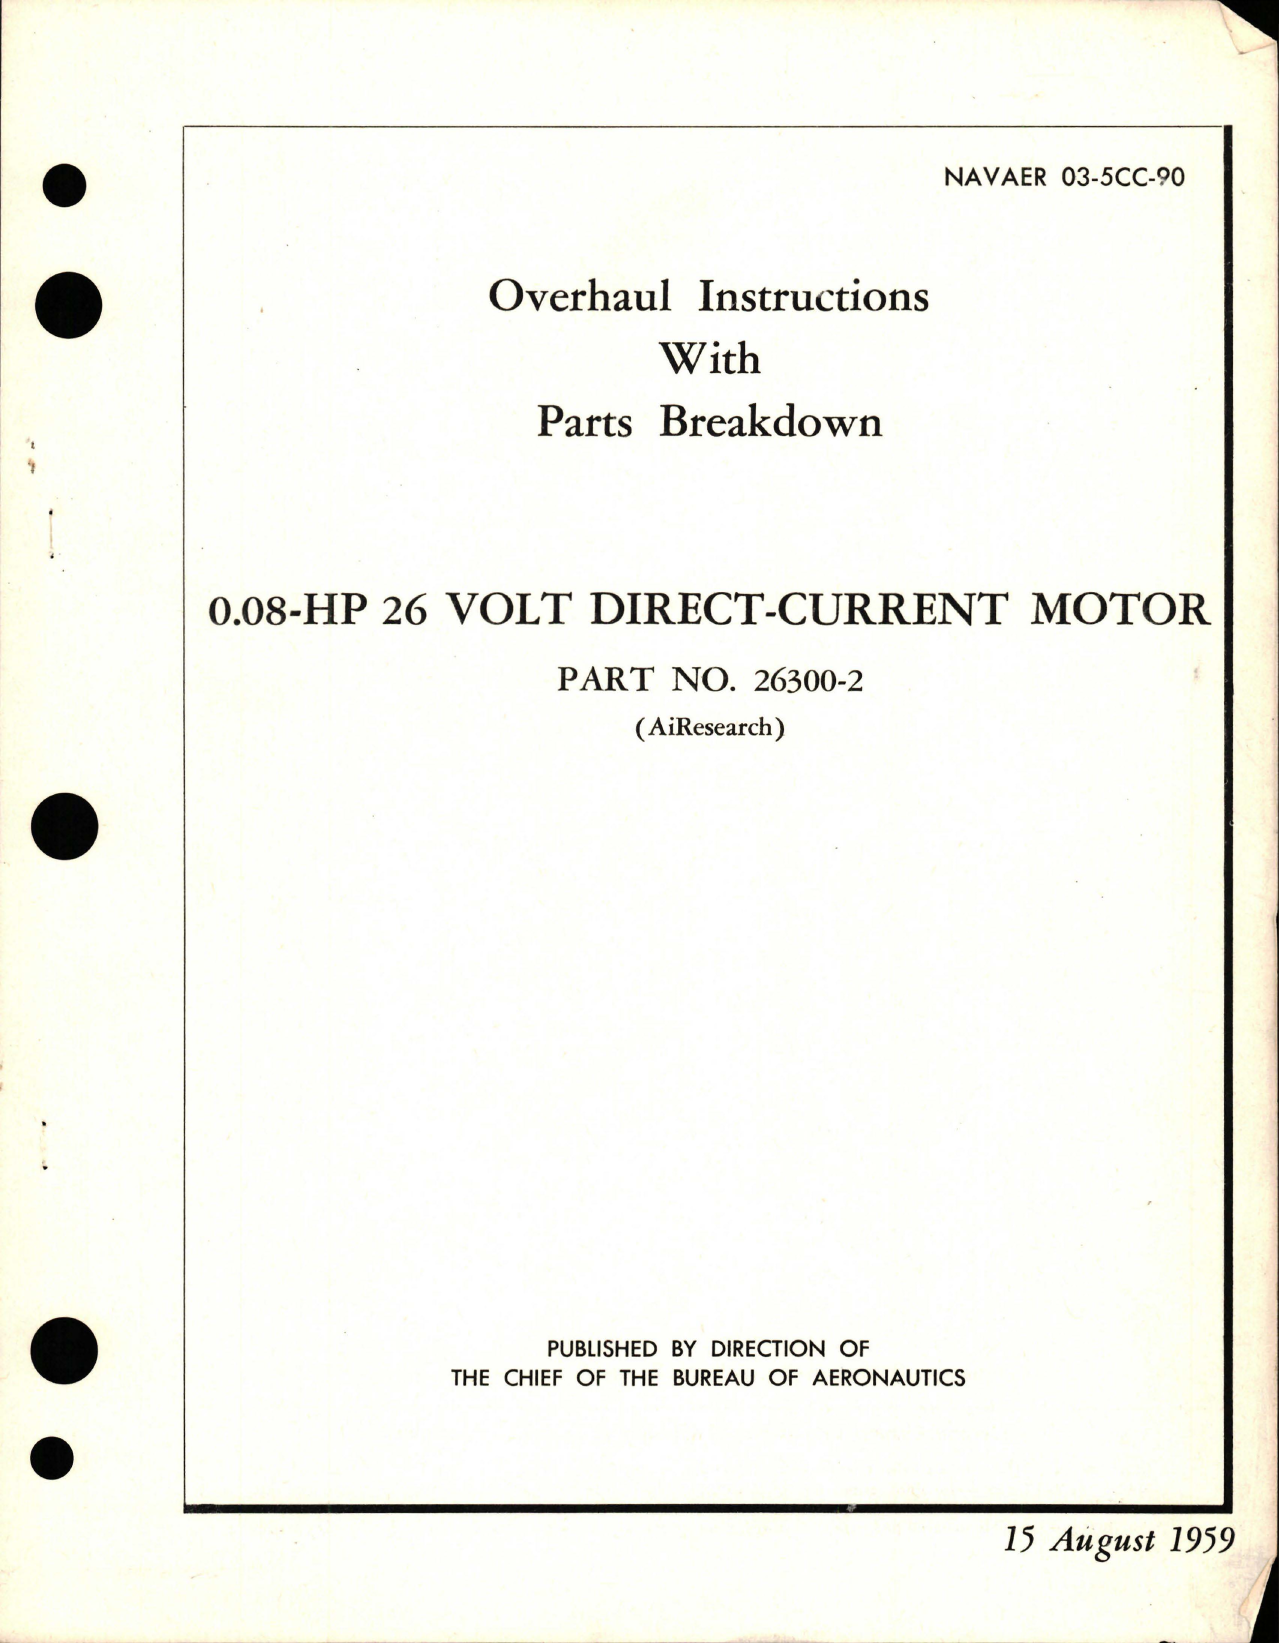 Sample page 1 from AirCorps Library document: Overhaul Instructions with Parts Breakdown for Direct -Current Motor 0.08HP 26 Volt - Part 26300-2